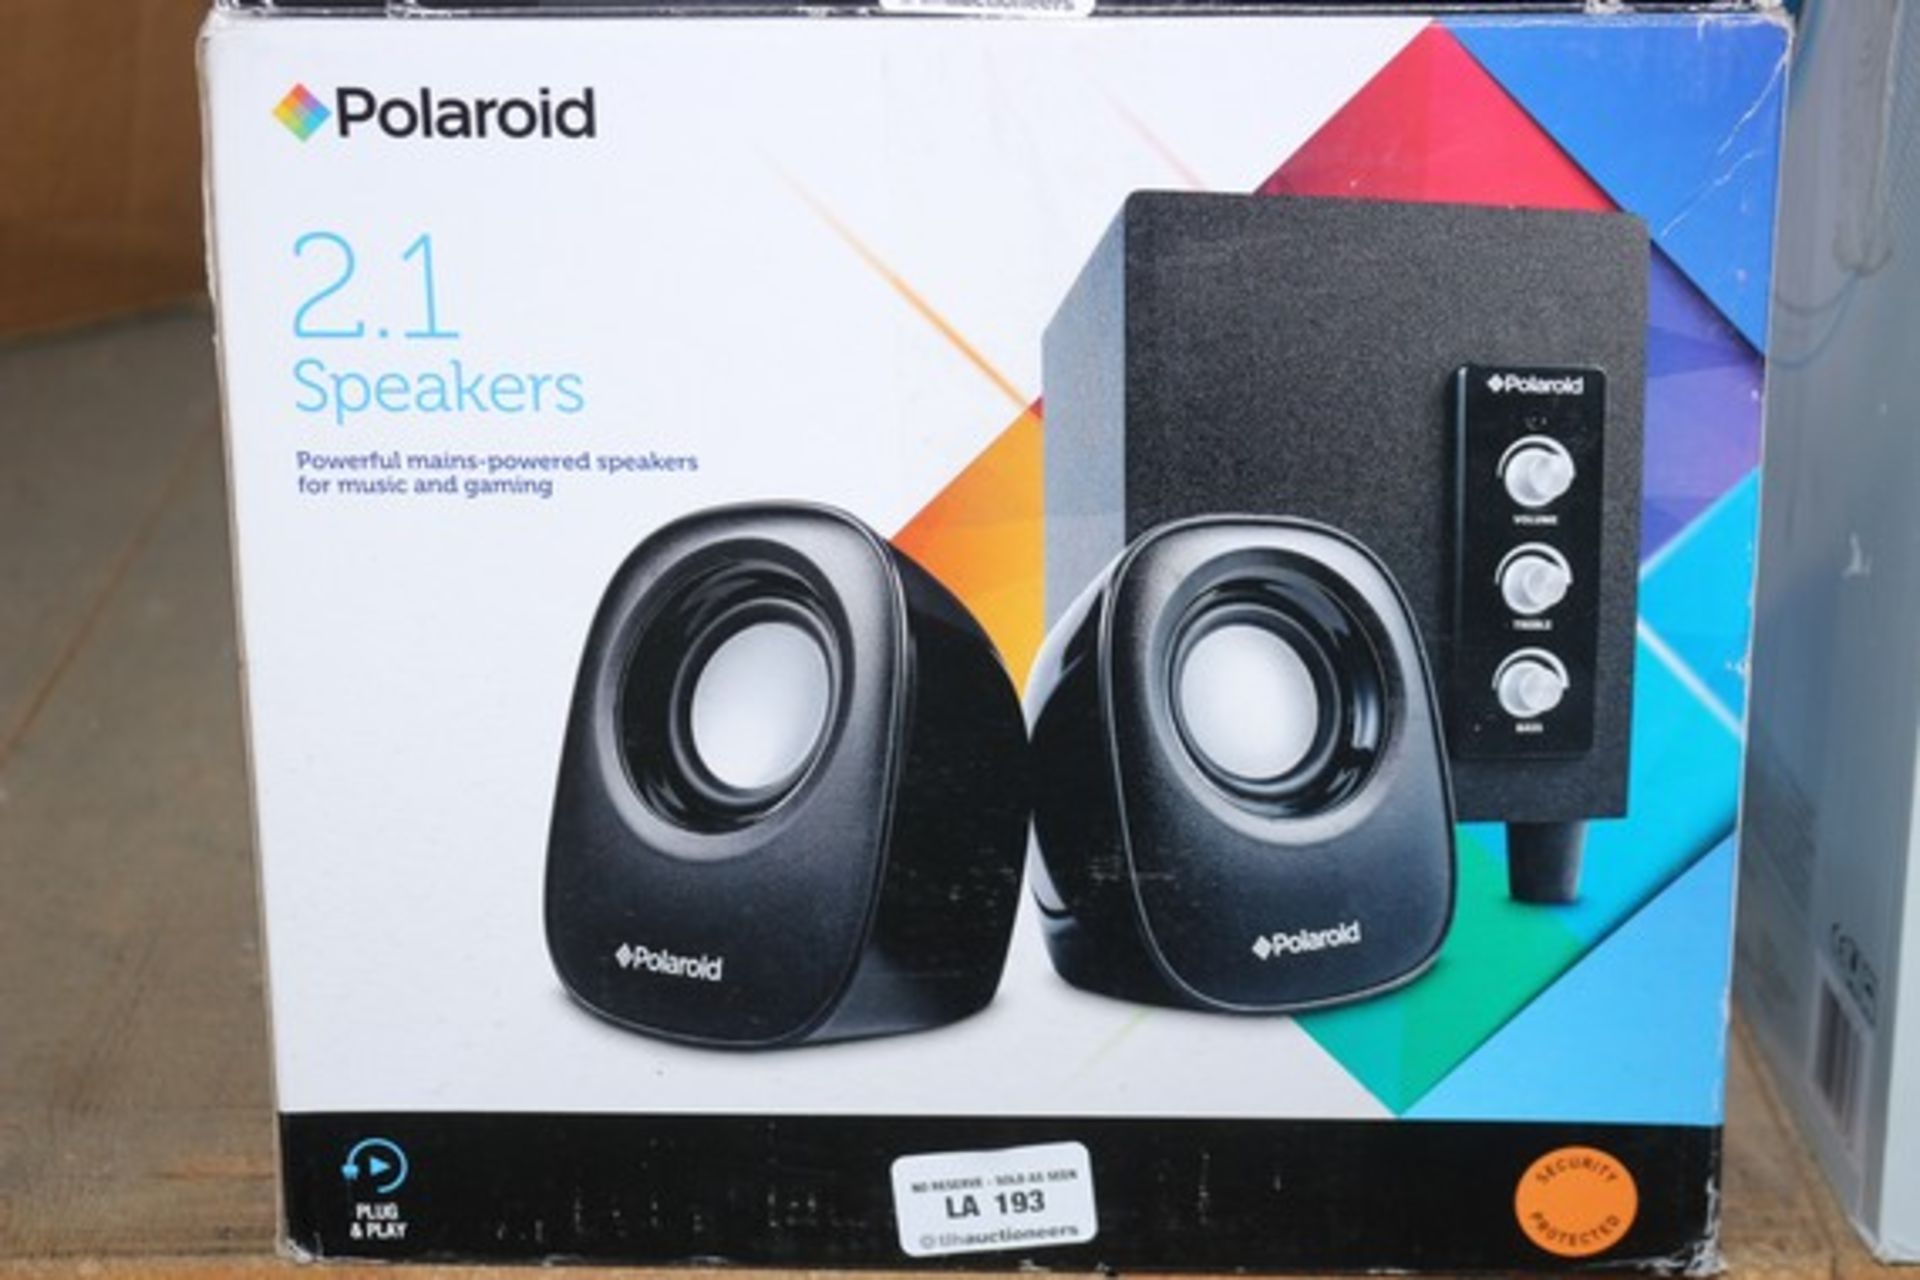 1 x POLAROID 2.1 SPEAKER SYSTEM *PLEASE NOTE THAT THE BID PRICE IS MULTIPLIED BY THE NUMBER OF ITEMS